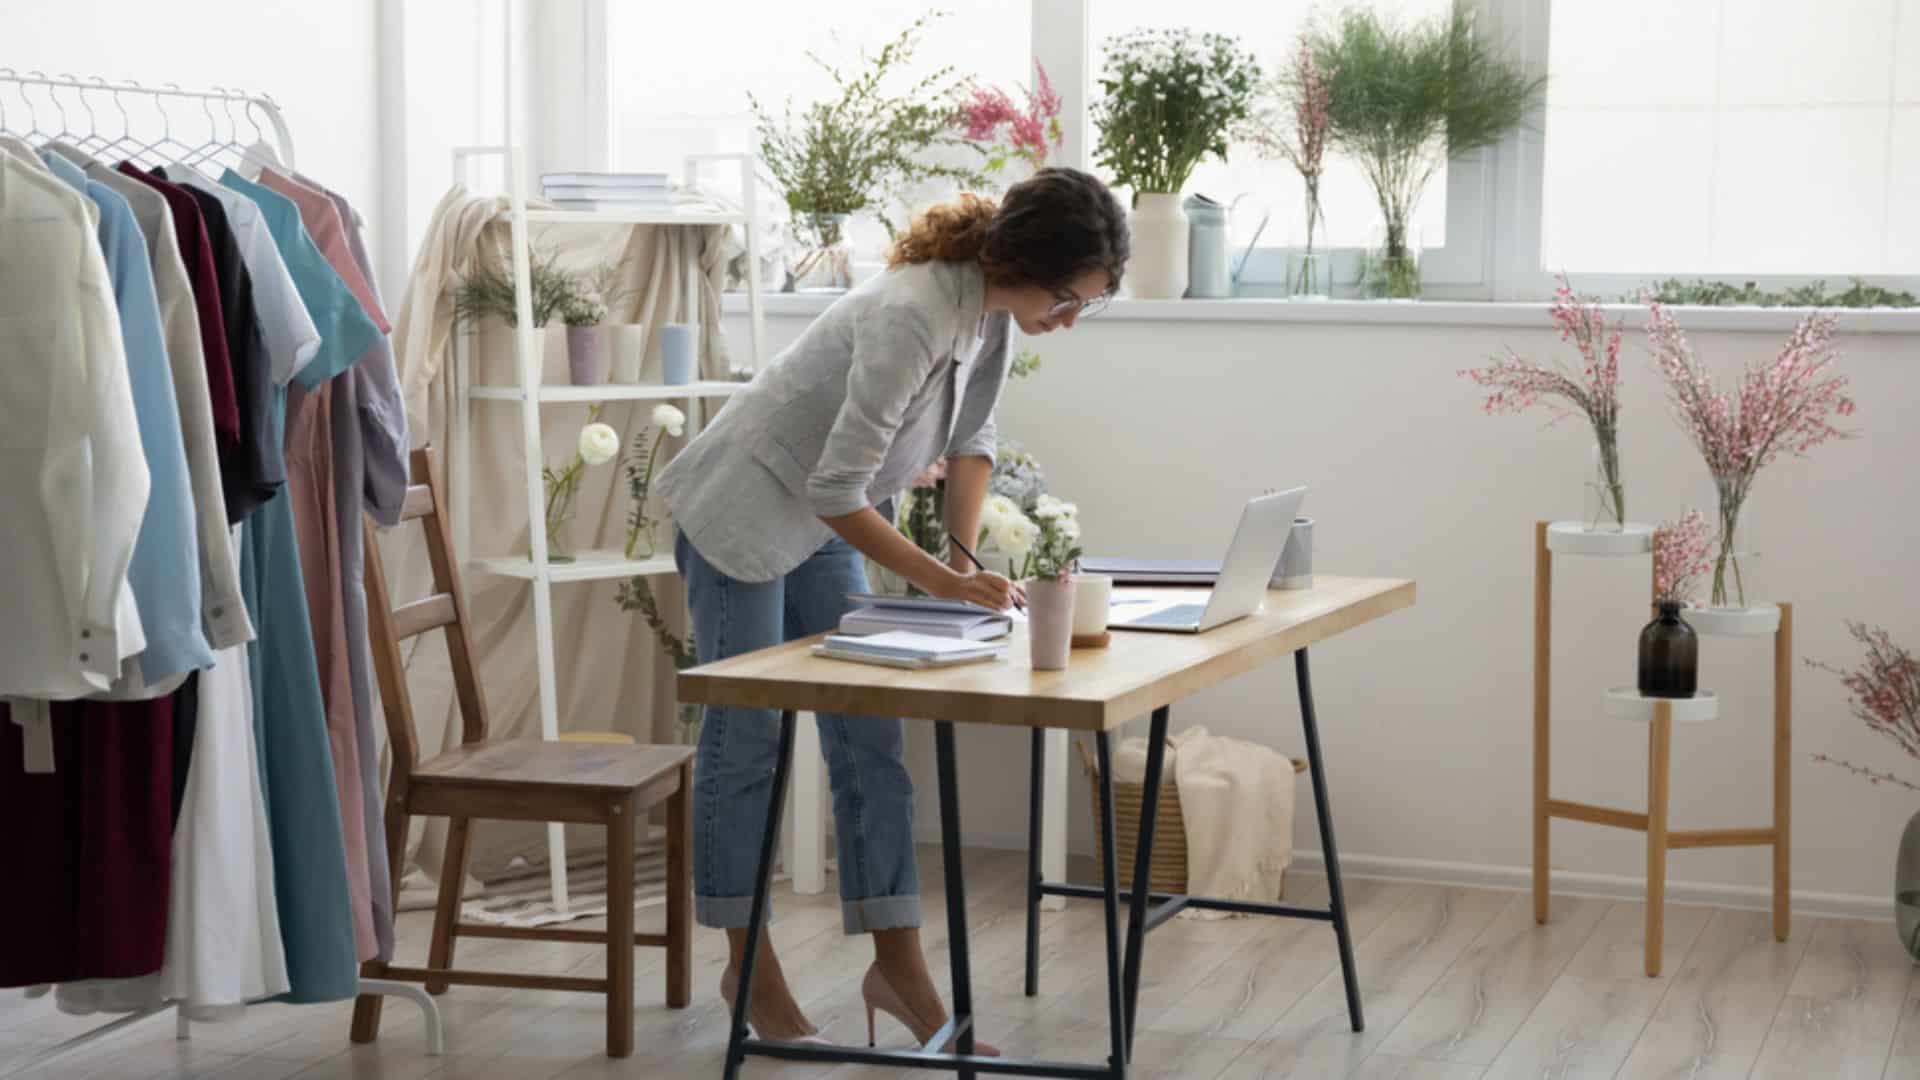 image showing a self-employed woman working at a desk